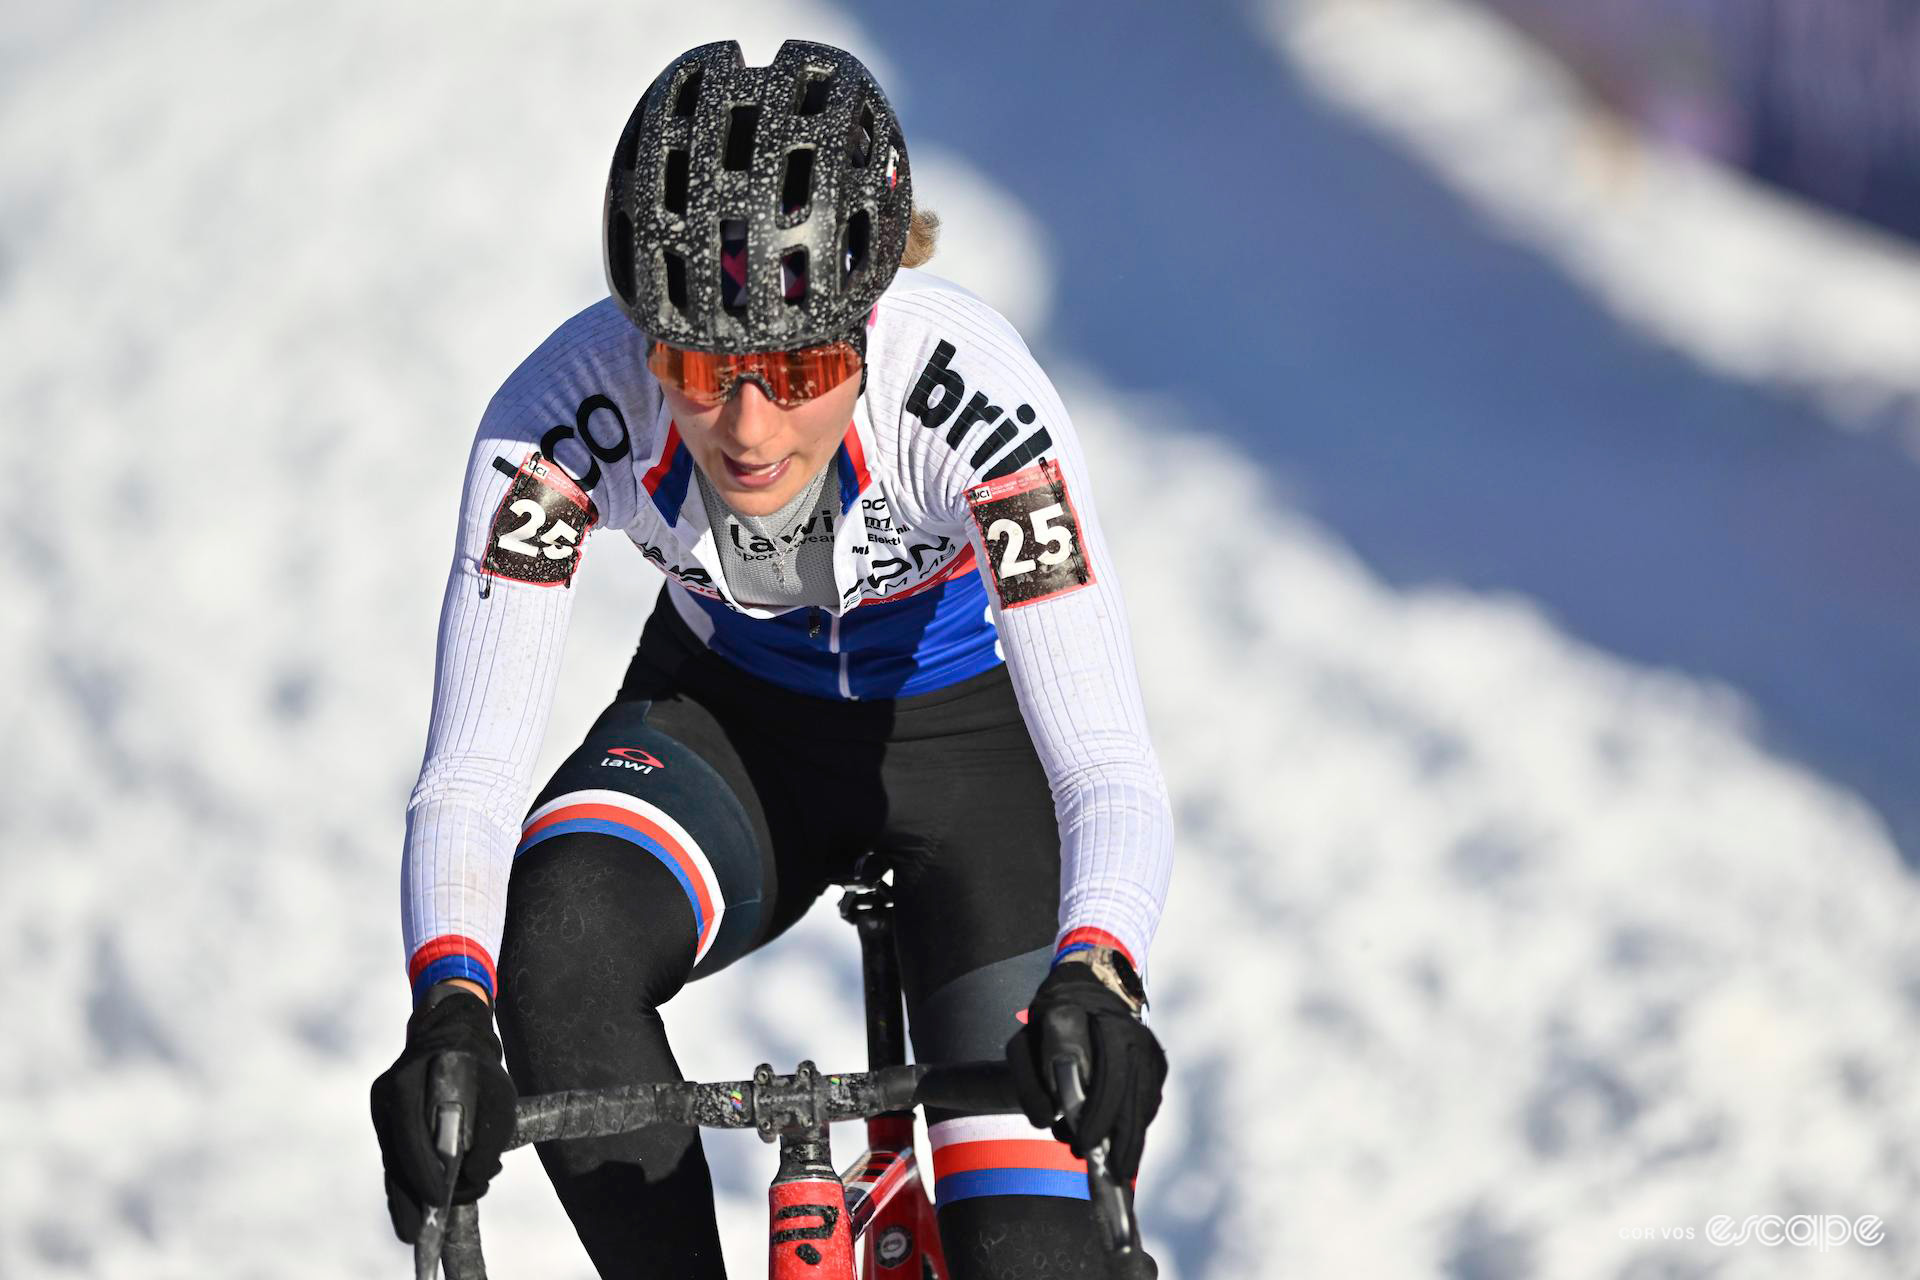 Kristyna Zemanová during UCI Cyclocross World Cup Val di Sole.